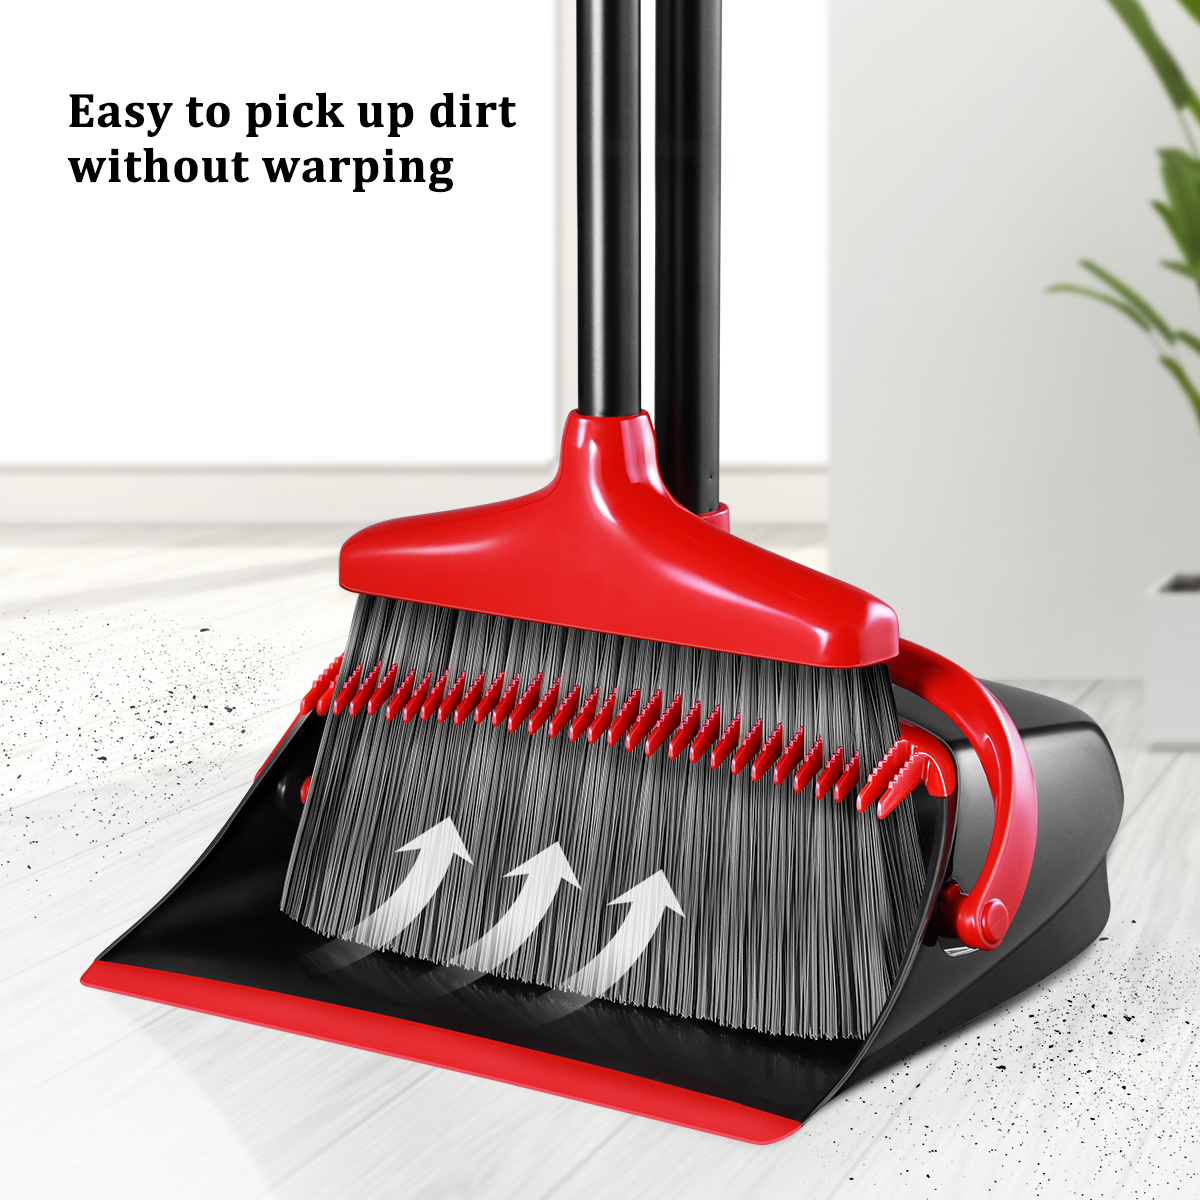 Broom and Dustpan Set Upright Standing Dust Pan With Extendable Broomstick Cleaning Brush Broom Dustpan Set for Home Wholesael